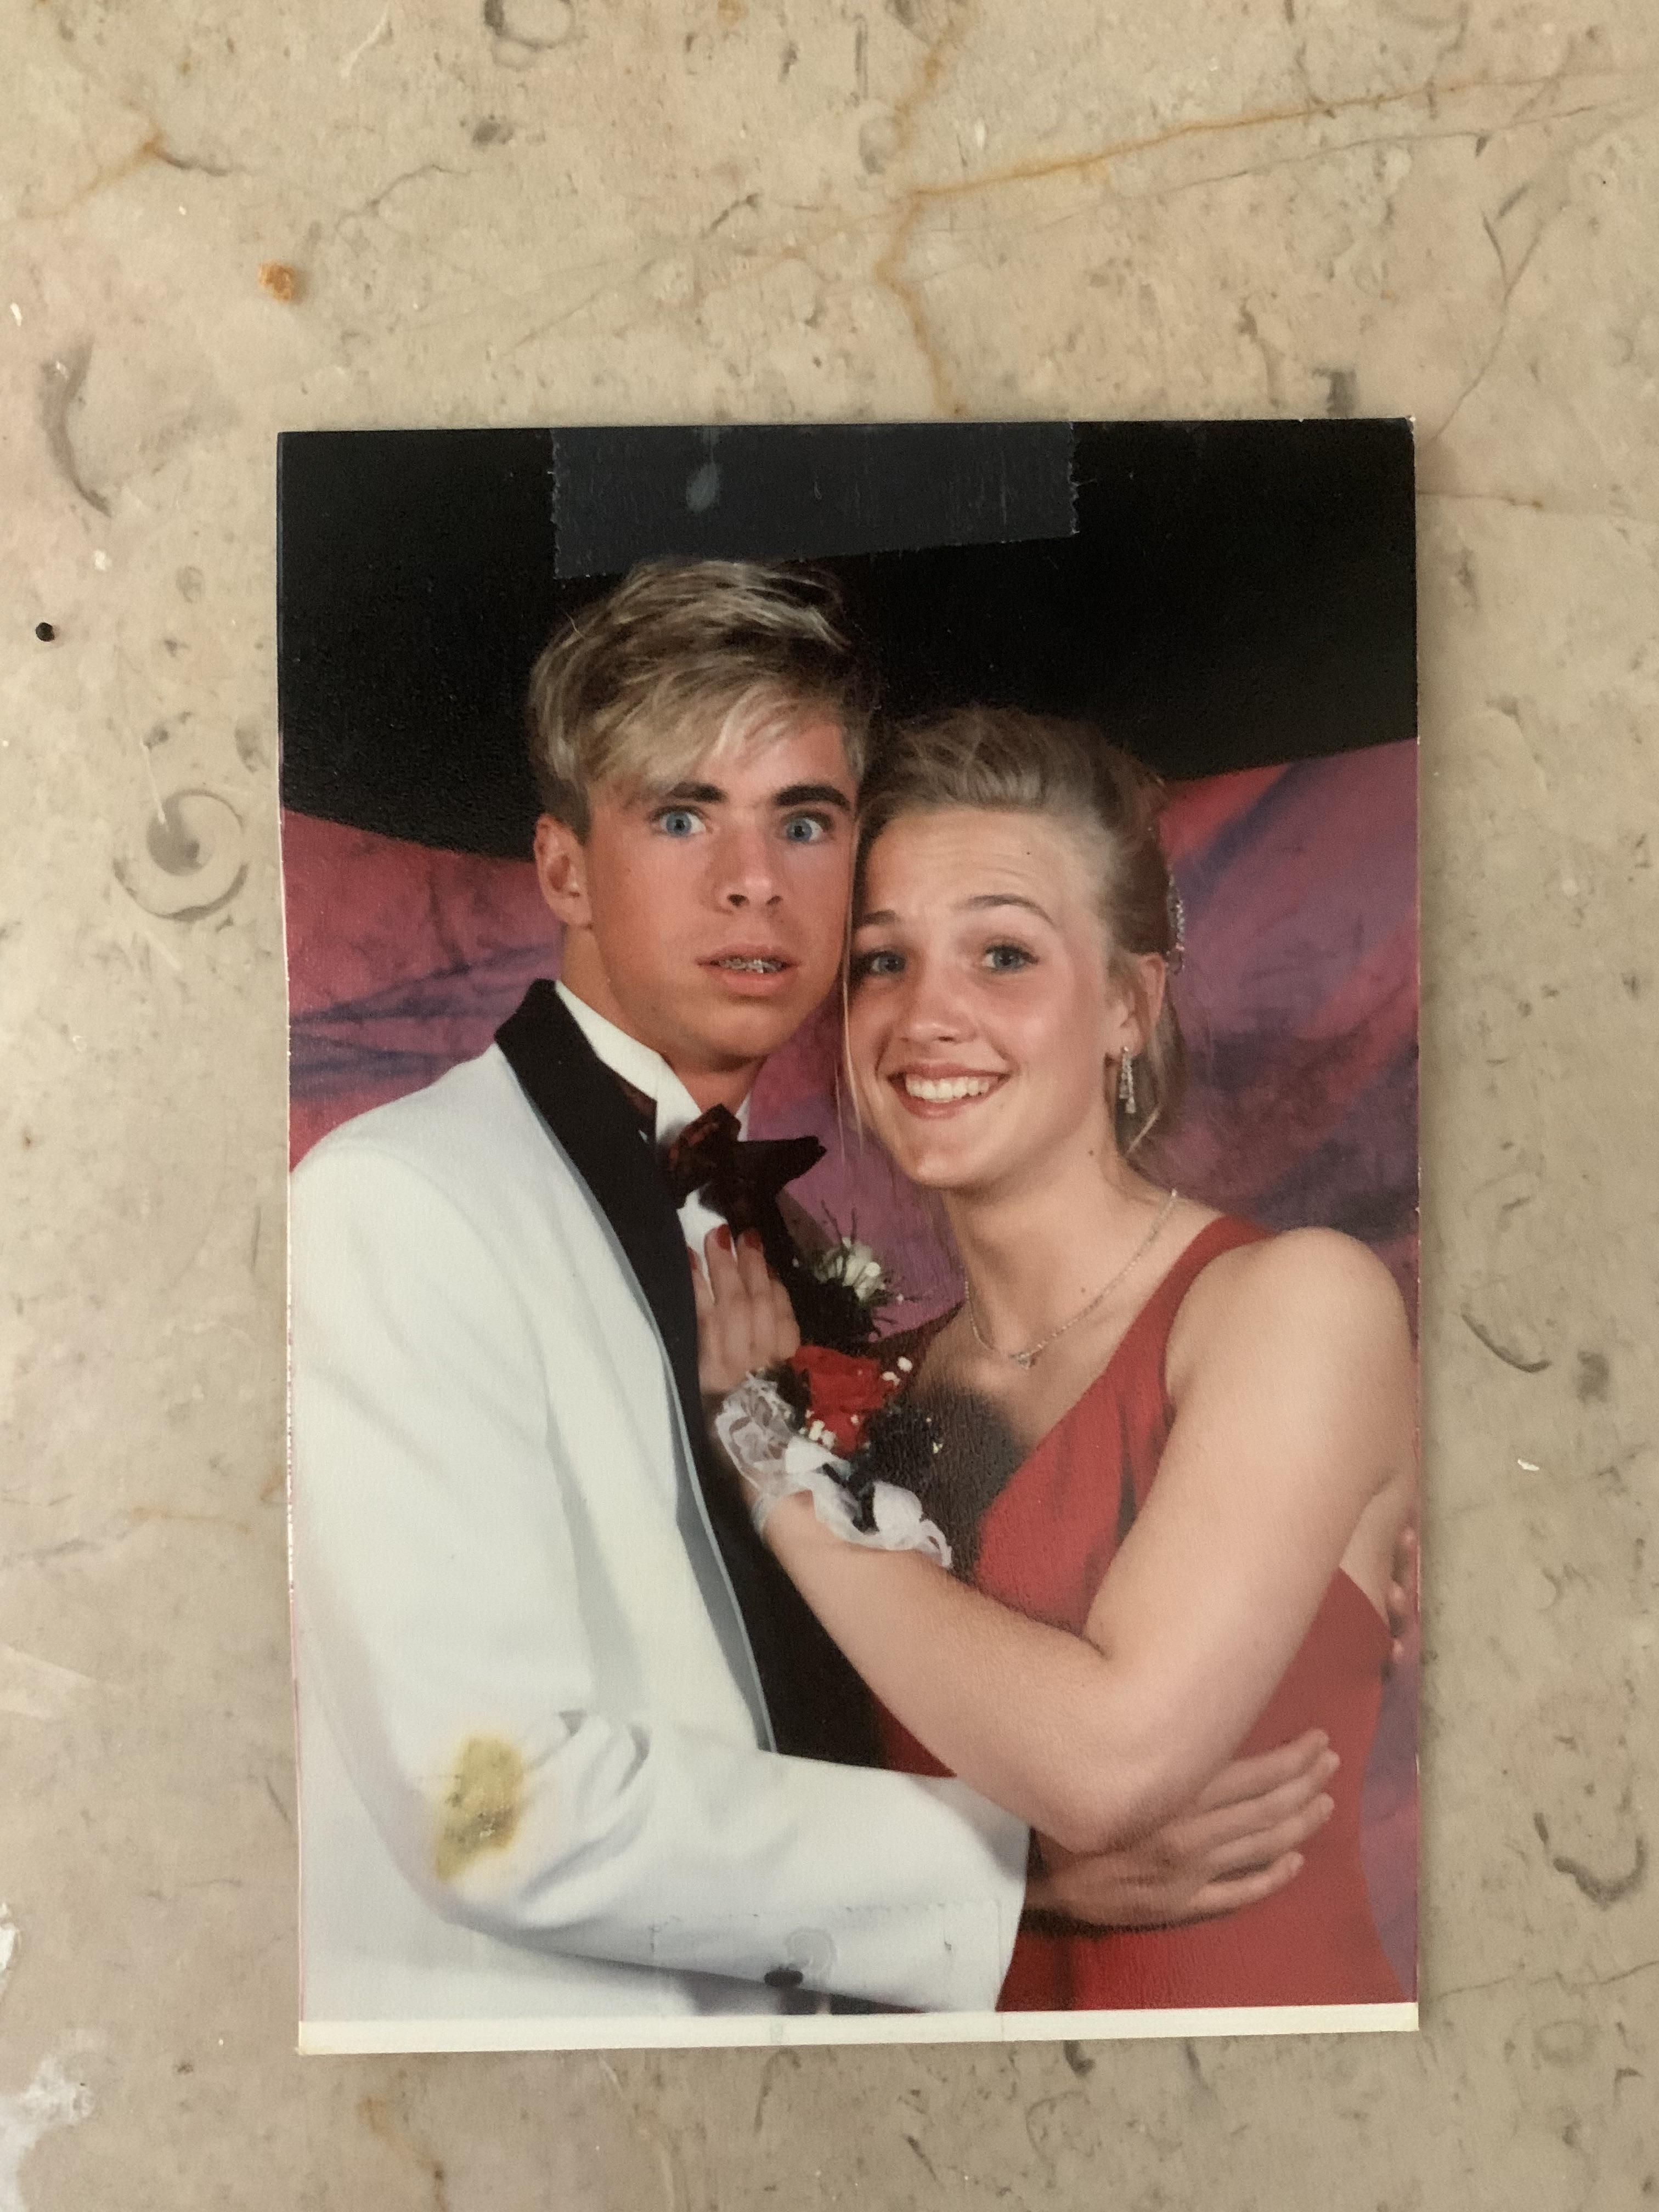 My uncle’s prom picture from the 90’s is one of the funniest photos I’ve seen.